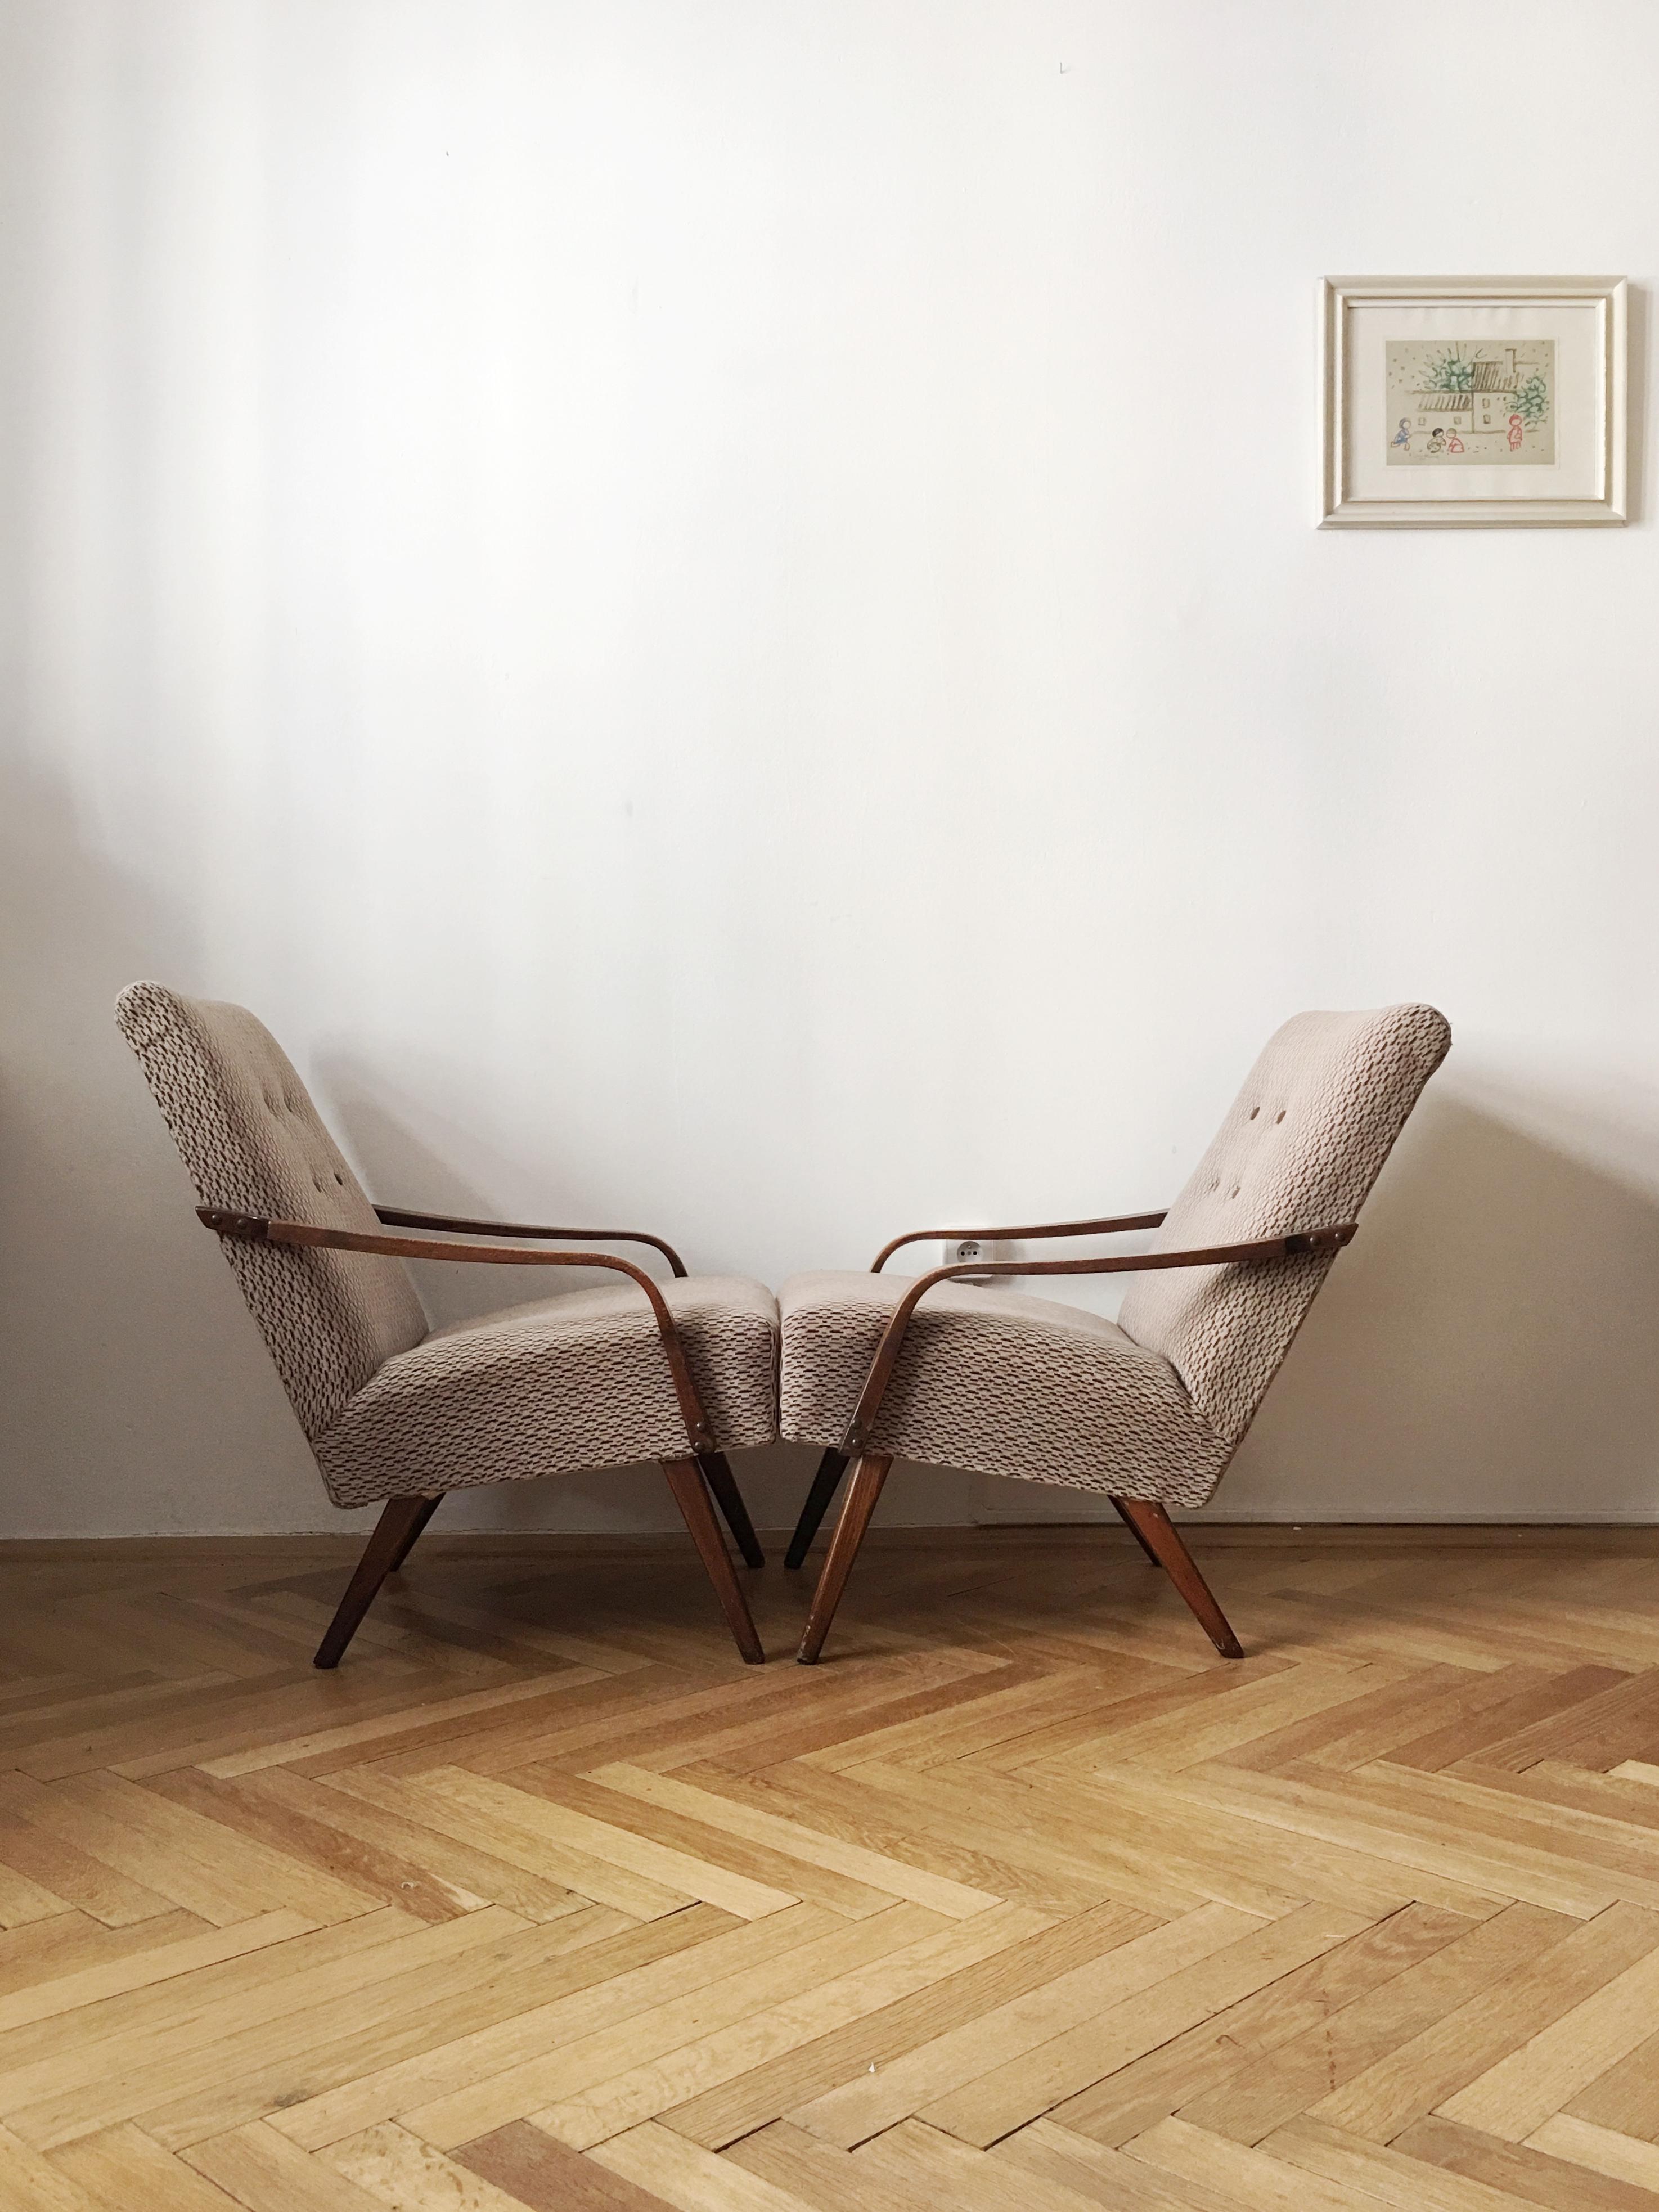 Like a brand new, armchairs made in Czechoslovakia in 1960s.

2 pieces, reupholstered

Measures: H 82 cm x W 57 cm x D 80 cm.